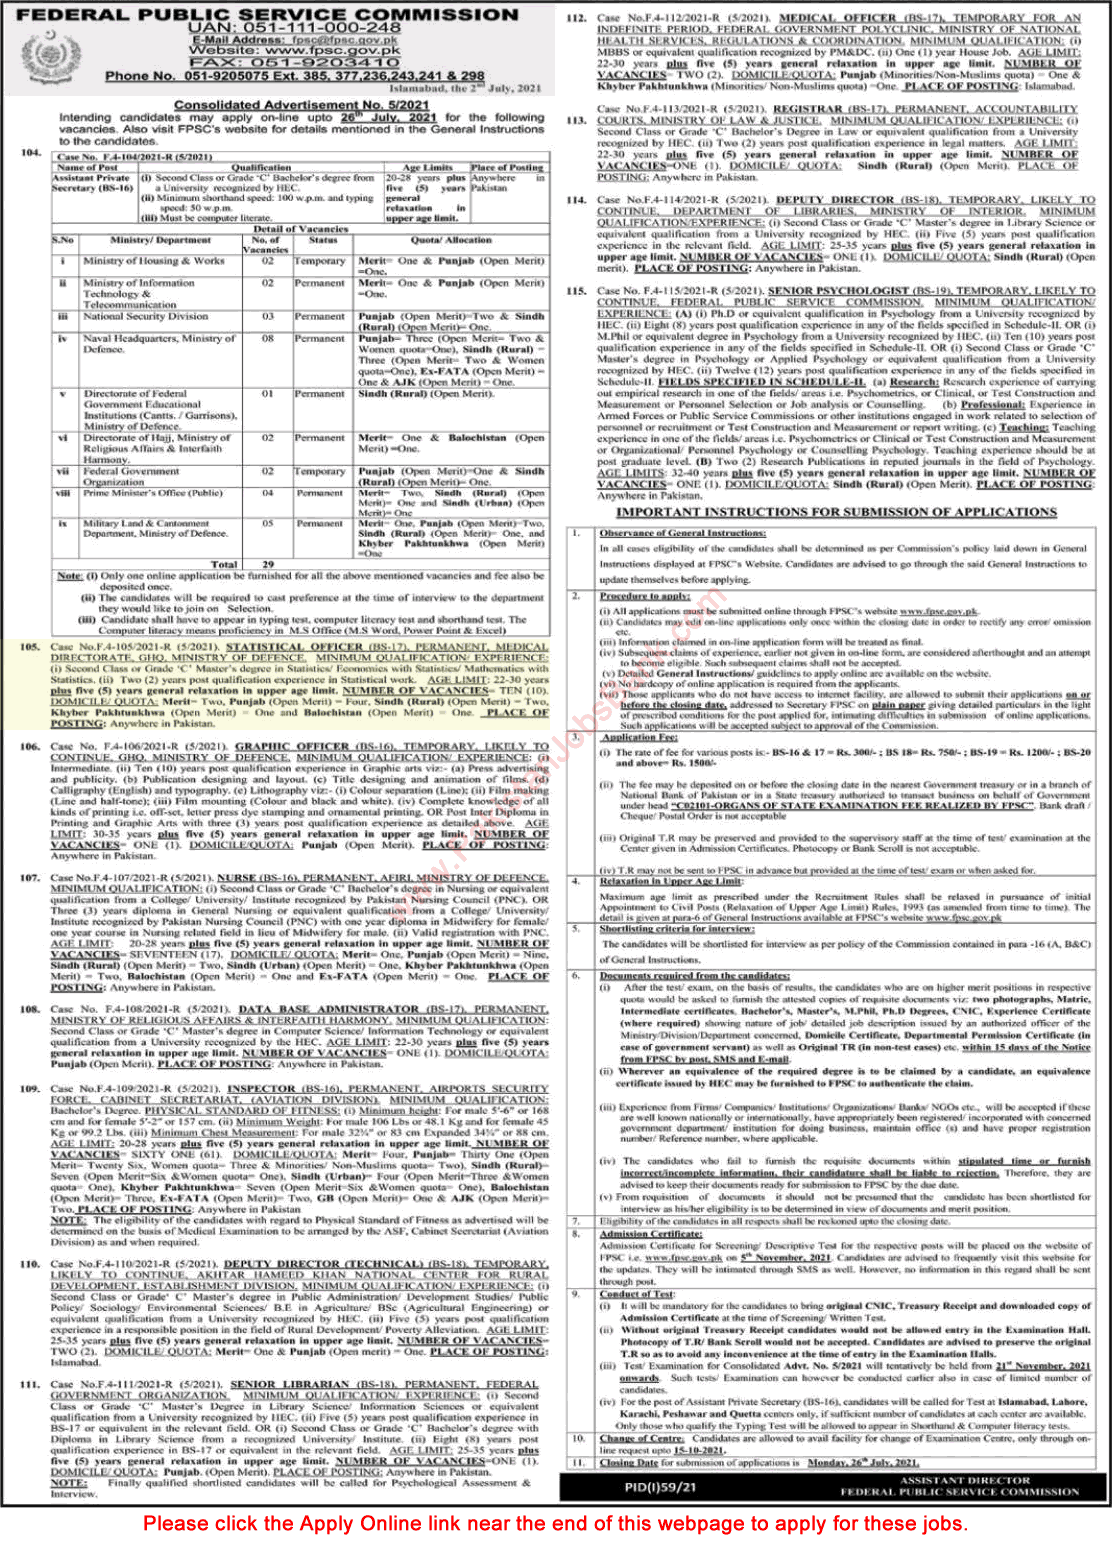 Statistical Officer Jobs in Medical Directorate GHQ Rawalpindi 2021 July FPSC Apply Online Latest